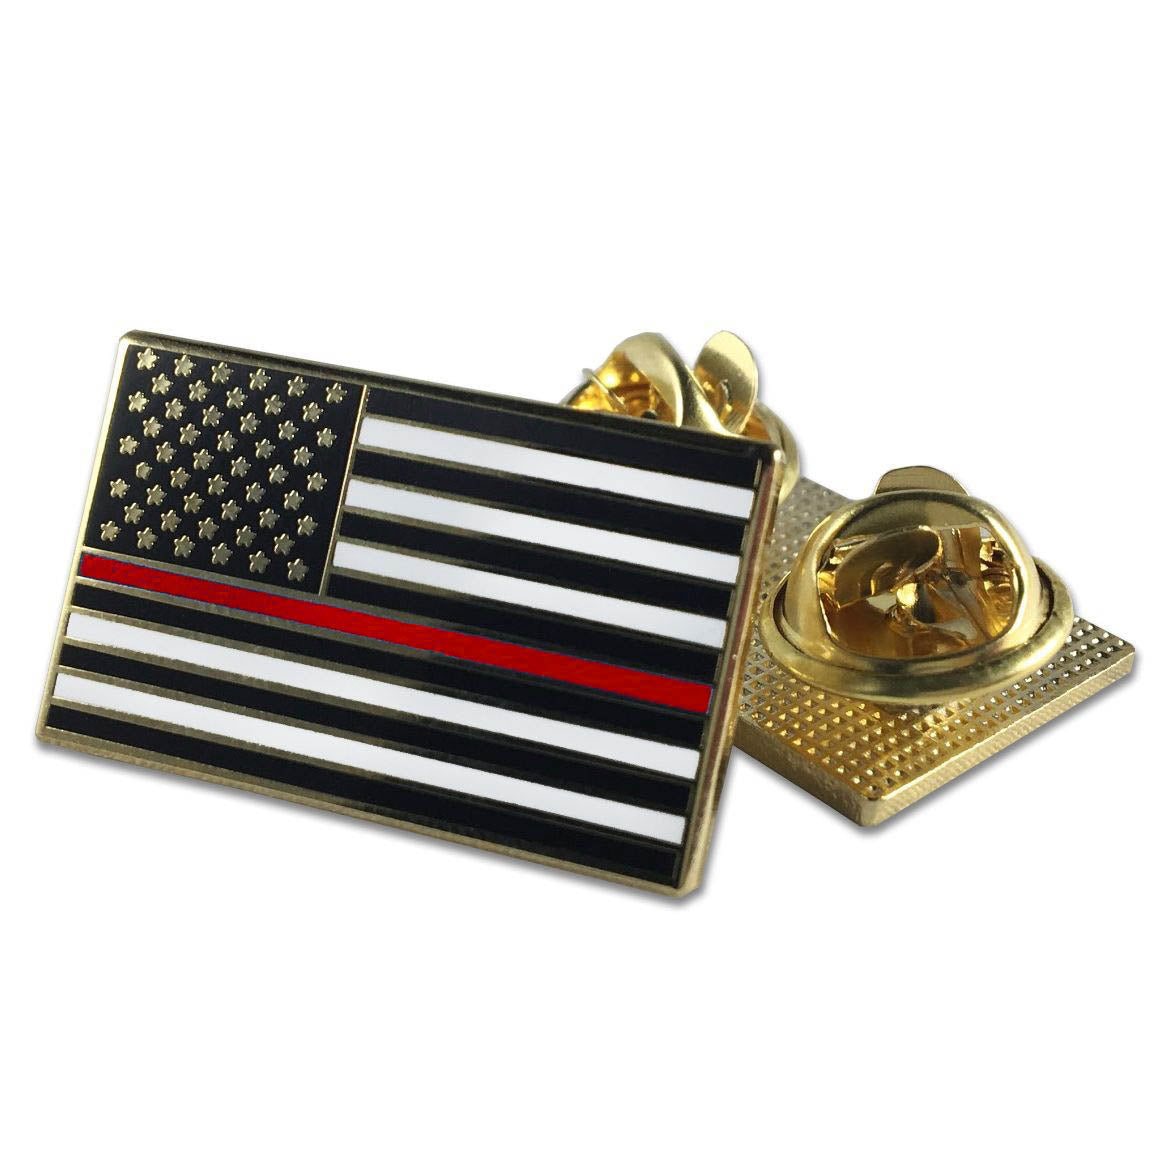 New Jersey Flag Lapel Pin, State Single and Double Flag Pins on Sale